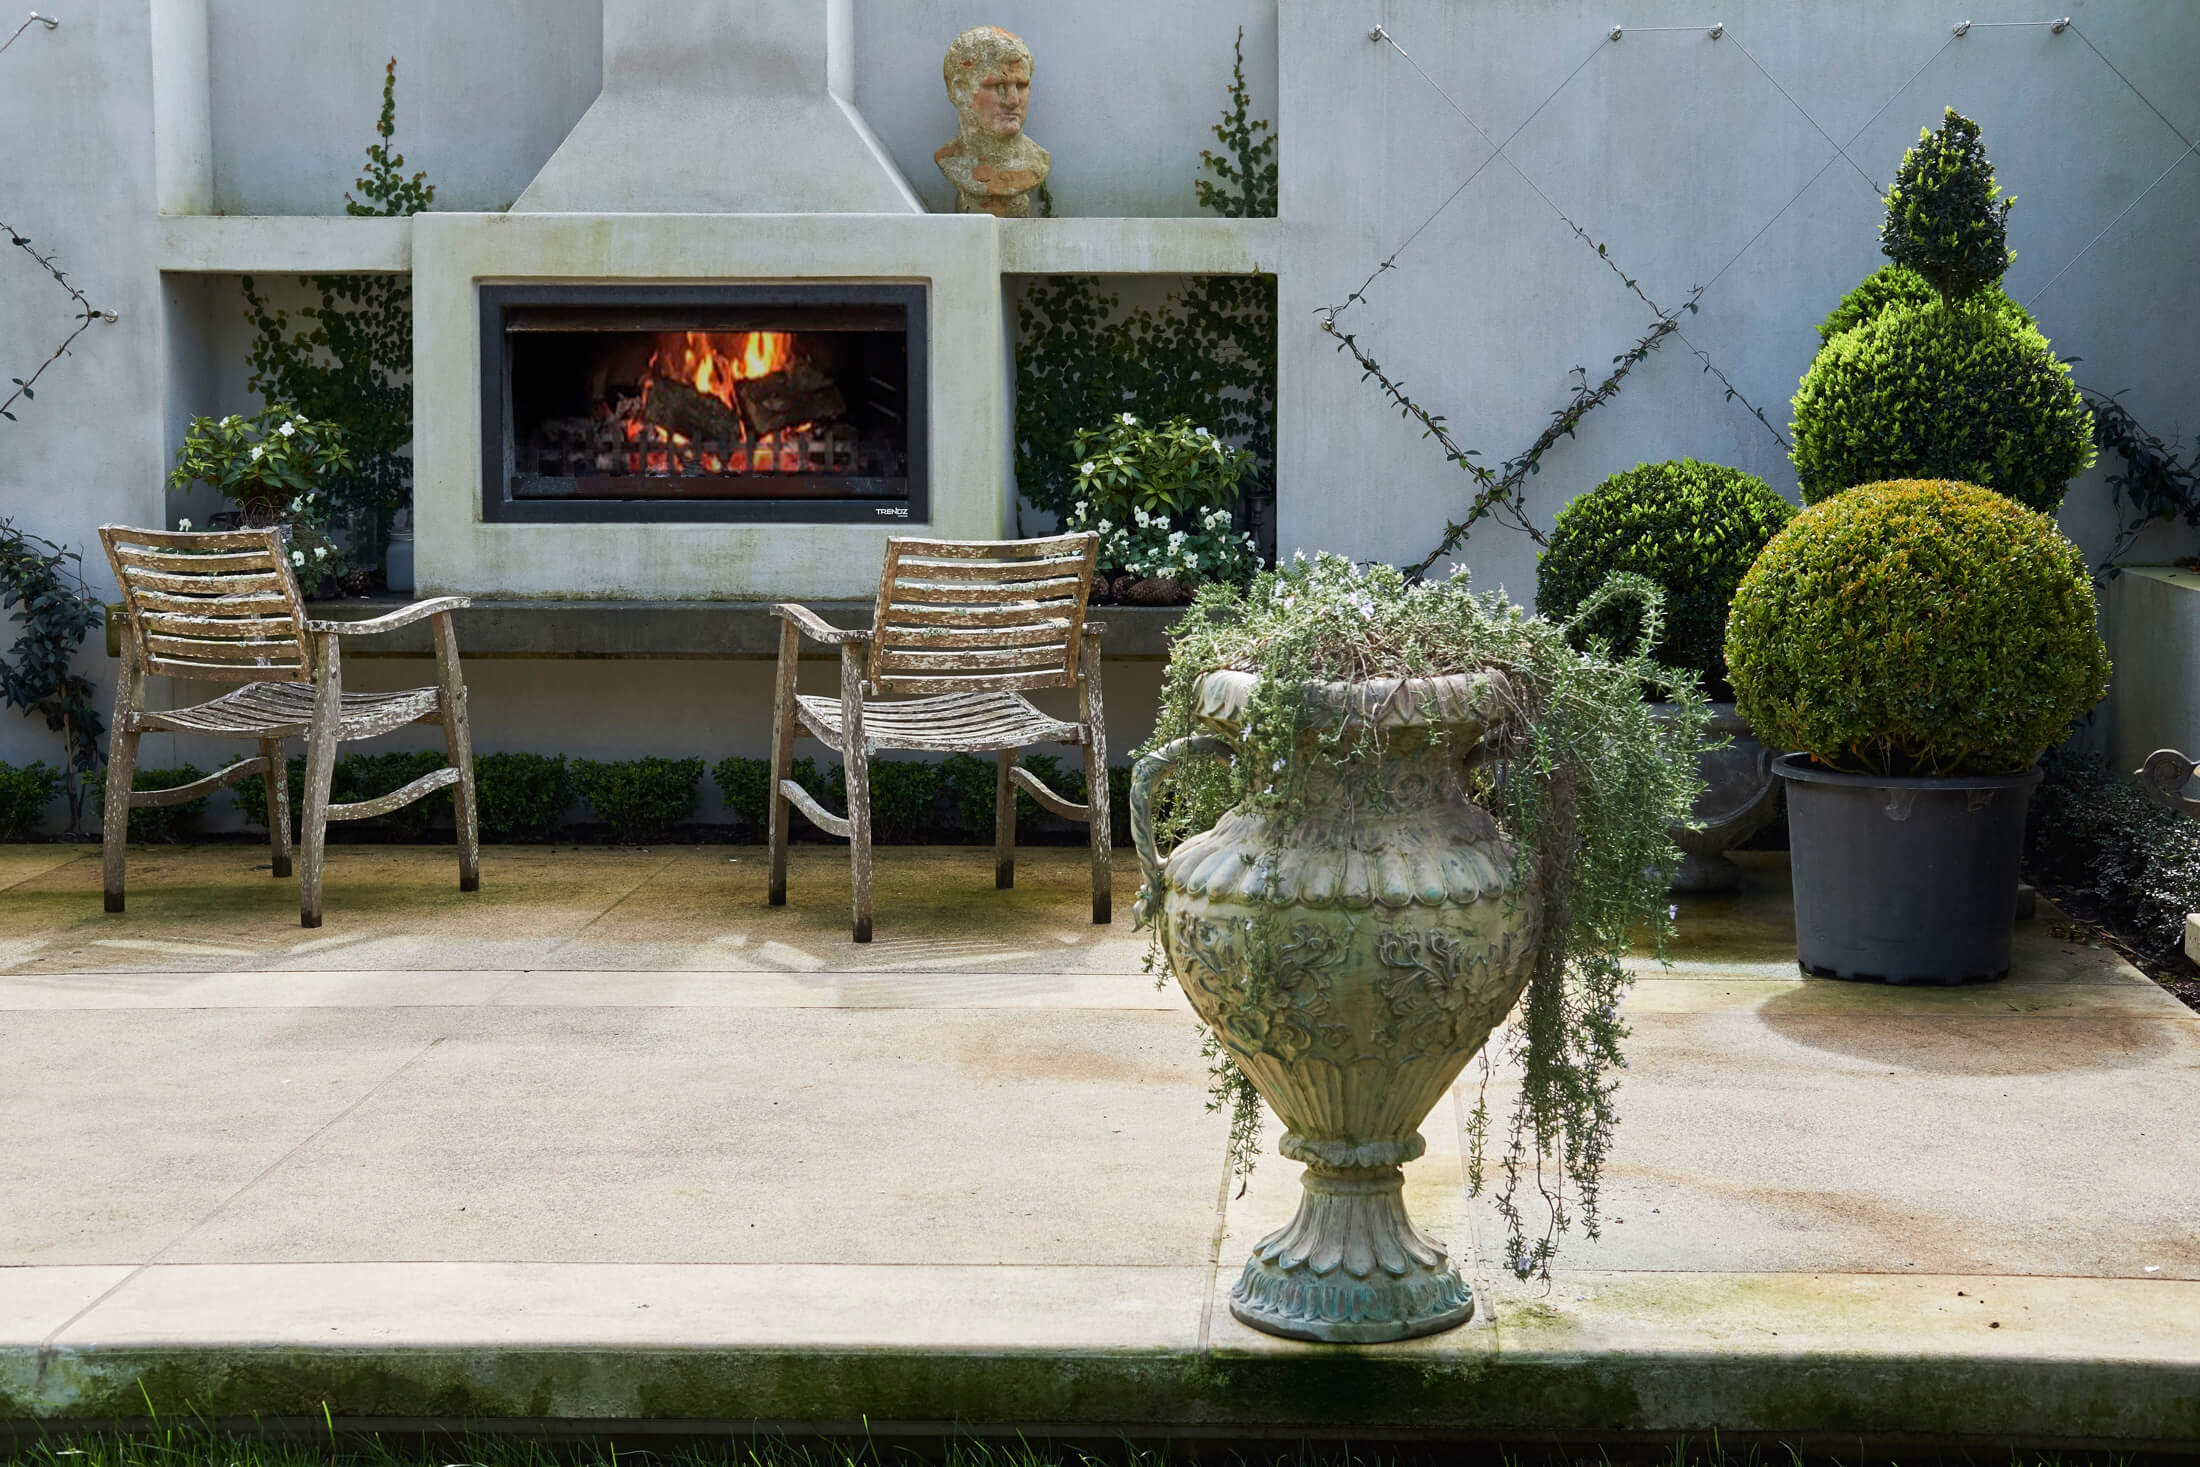 Best outdoor fireplace trendz for 2018 - traditional style with a tuscan style feel